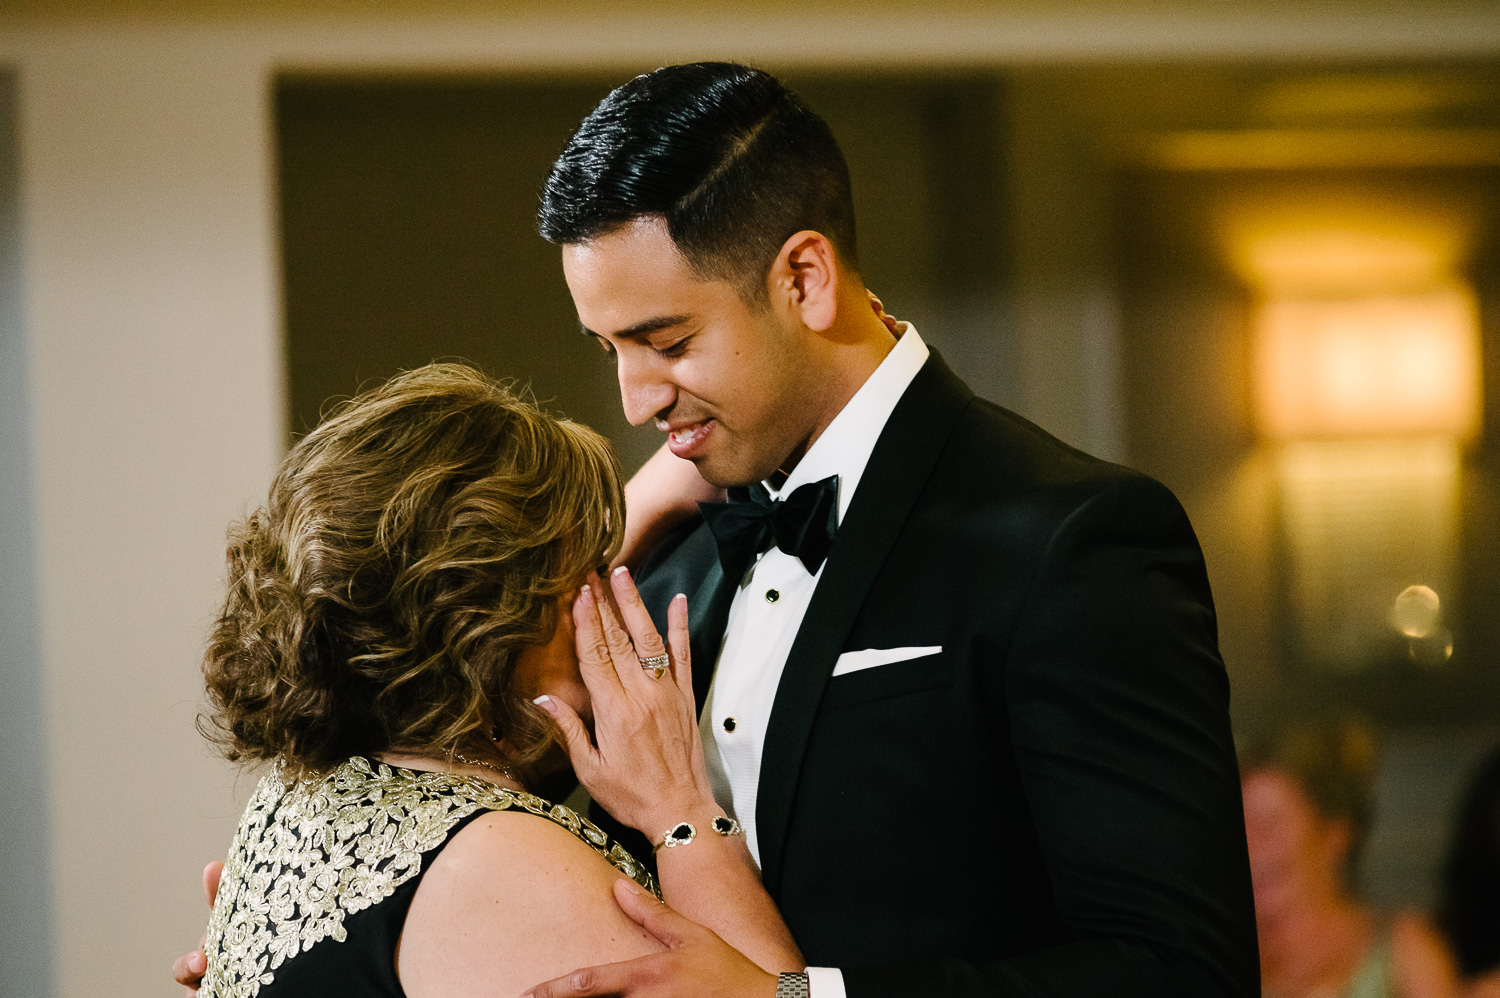 Mother of the groom wipes a tear during the first dance St. Anthony Hotel San Antonio Wedding Reception-46